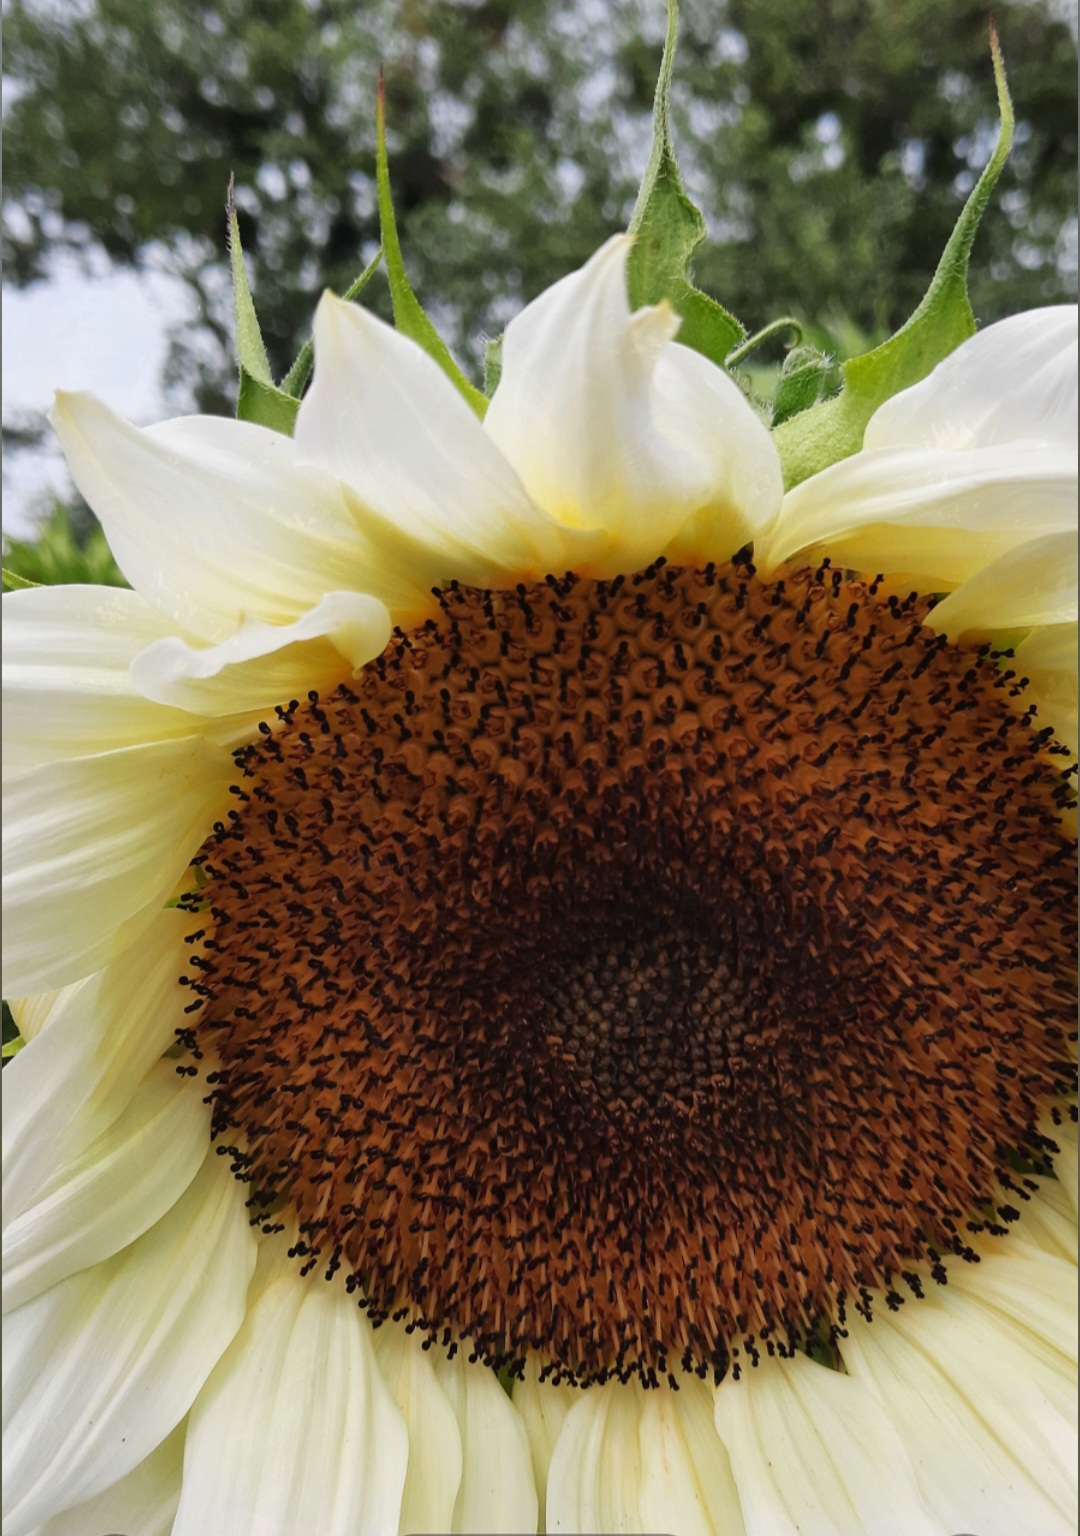 Image of a sunflower head